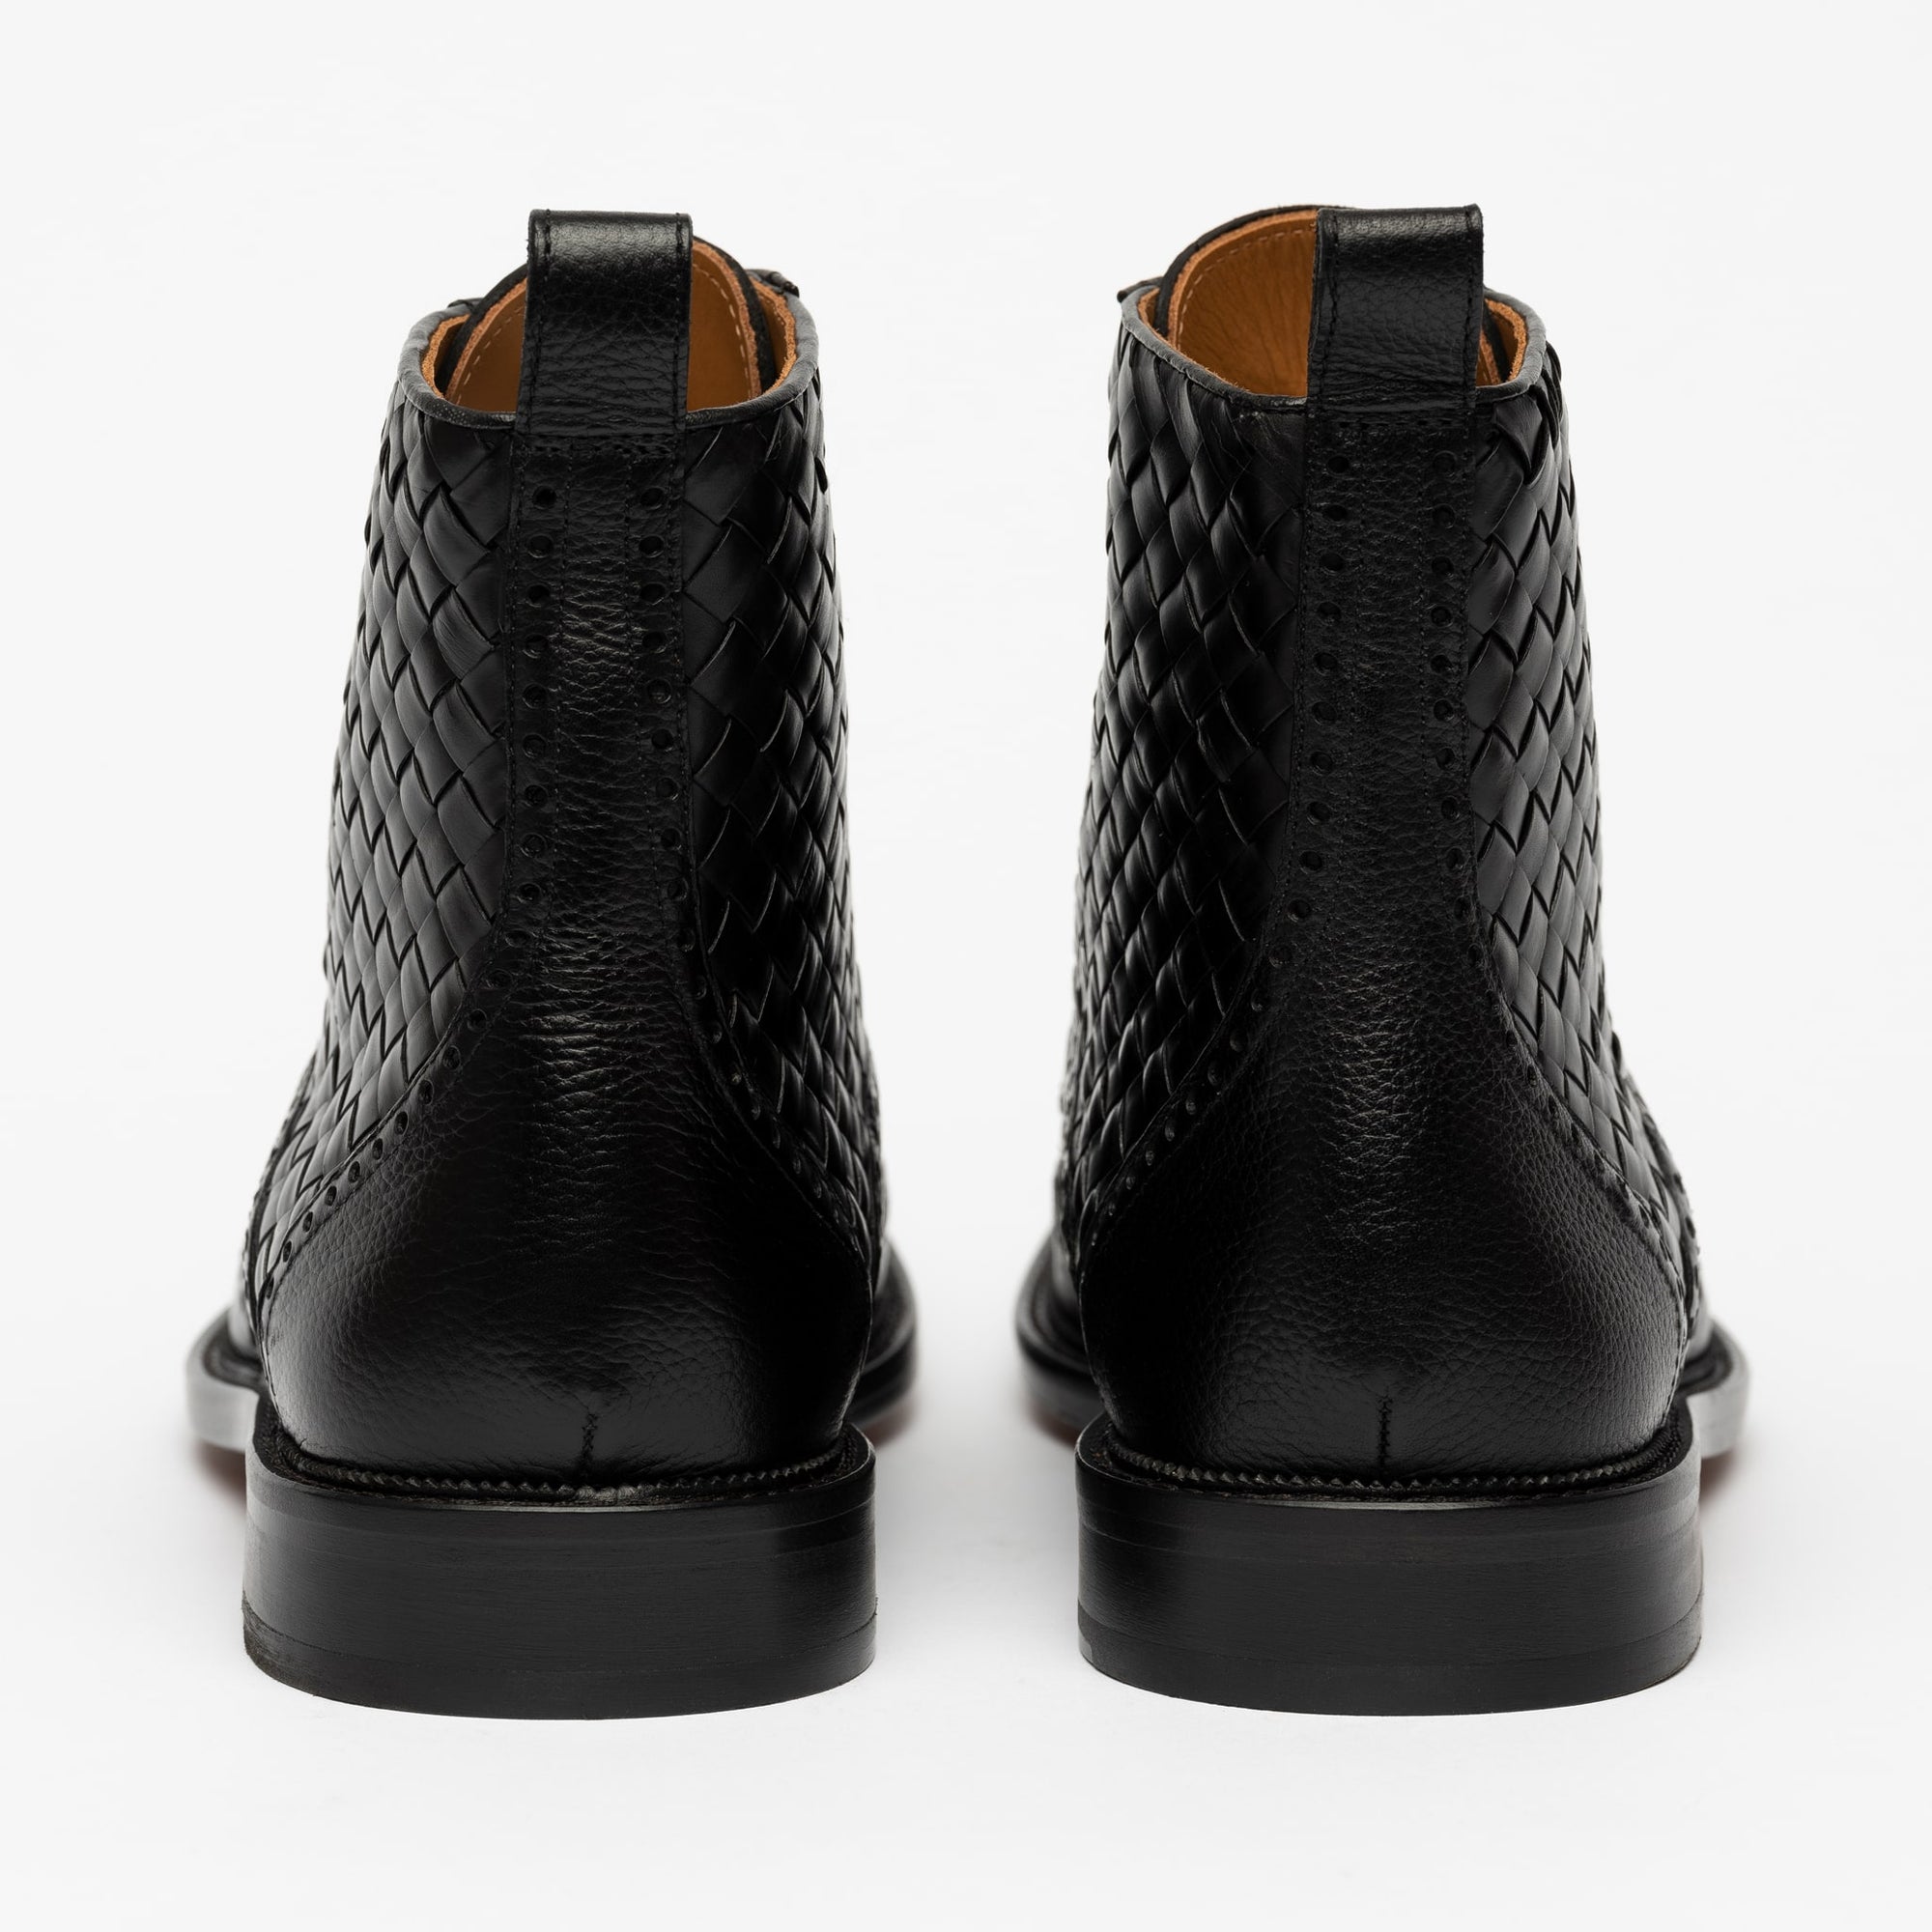 Saint Boot in Black back view